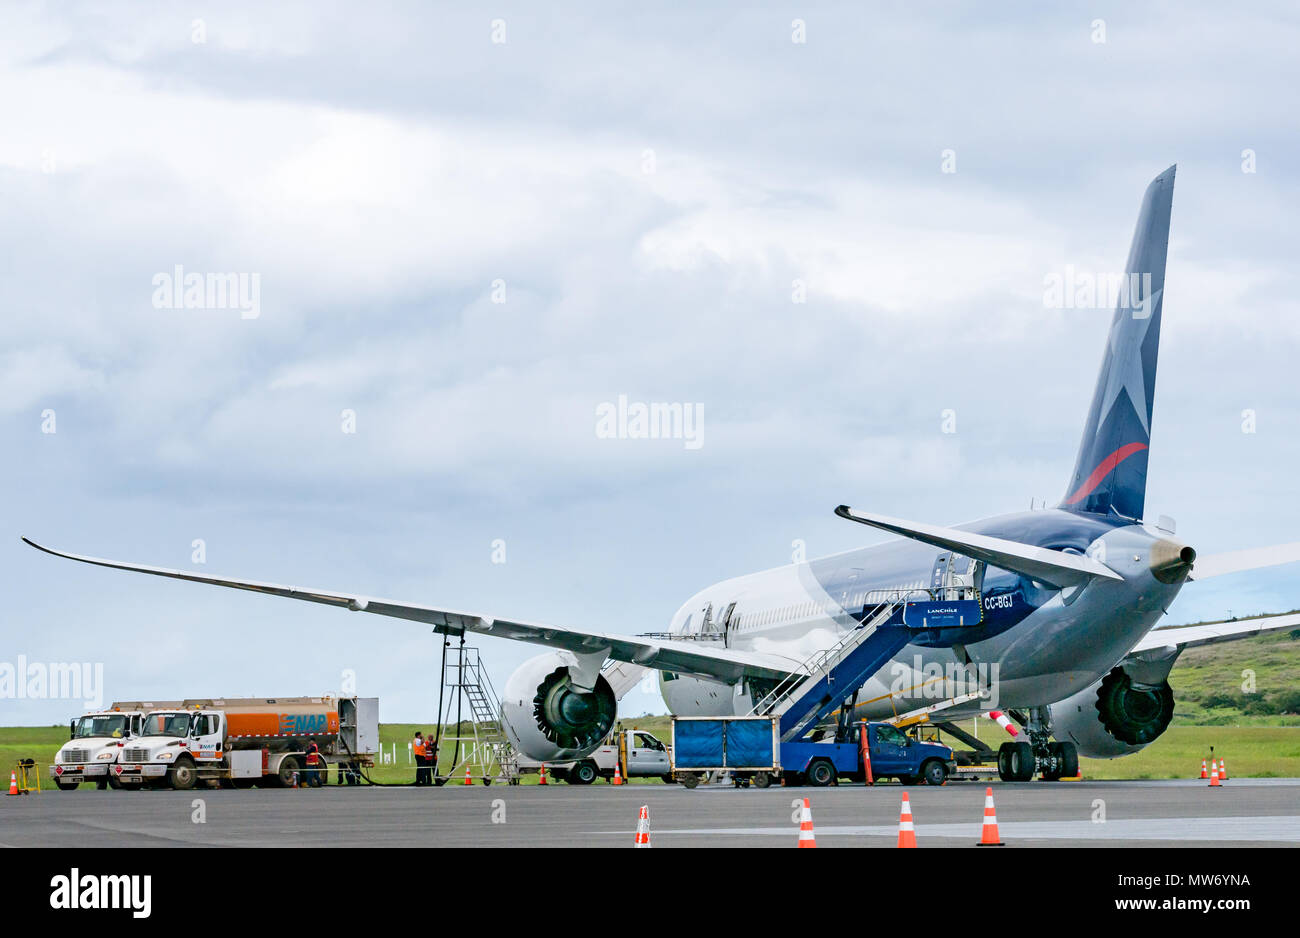 LATAM airline Dreamliner Boeing 787 on airport apron during rainy weather at Mataveri International Airport runway, Easter Island, Chile Stock Photo